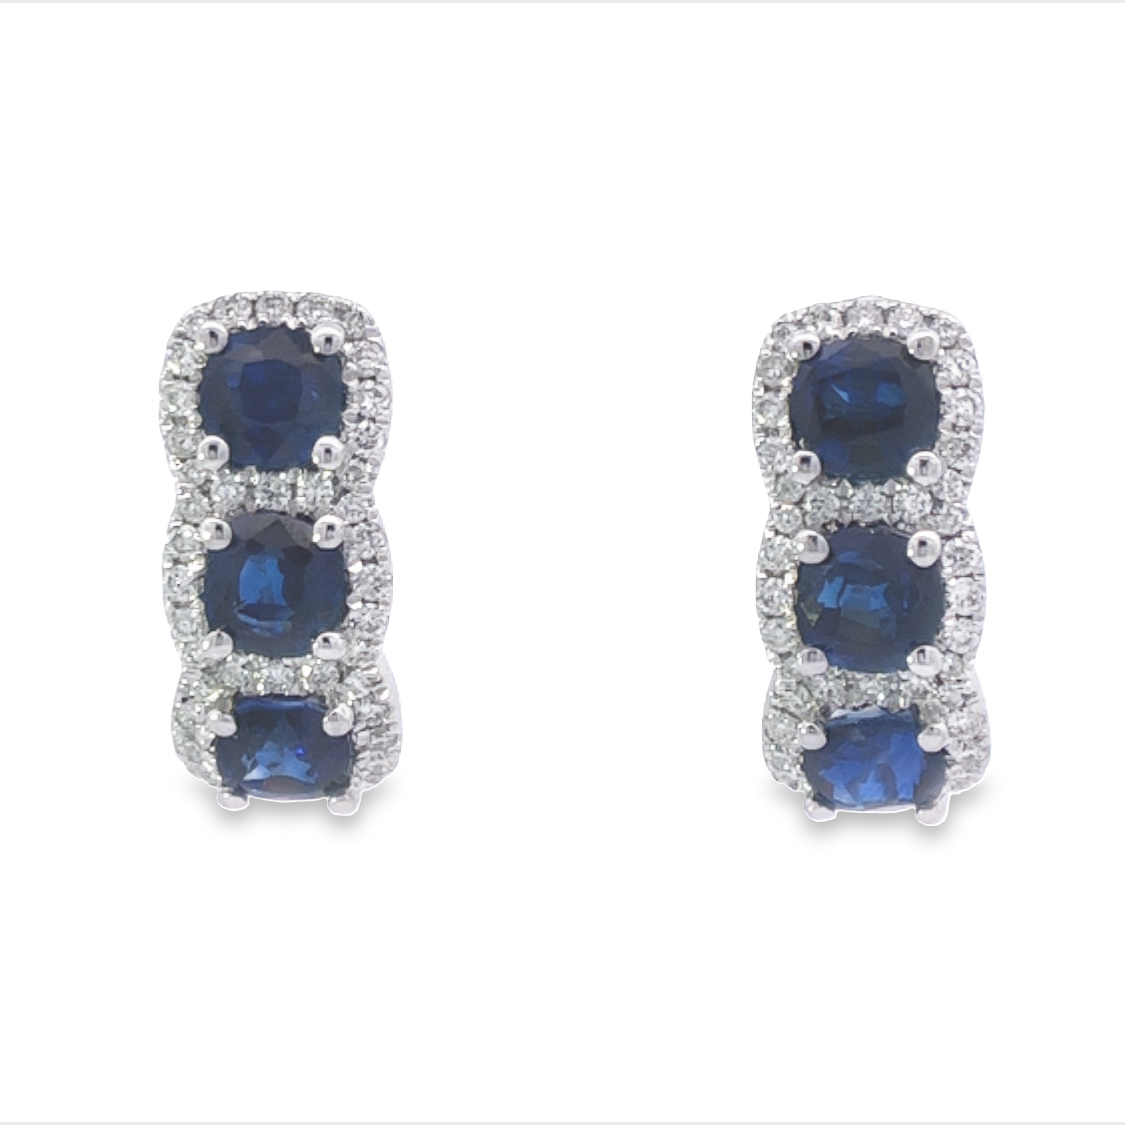 14K White Gold Hoop Earrings with 6 Round Sapphires 2.48 TCW & Round Diamonds 0.35 TCW